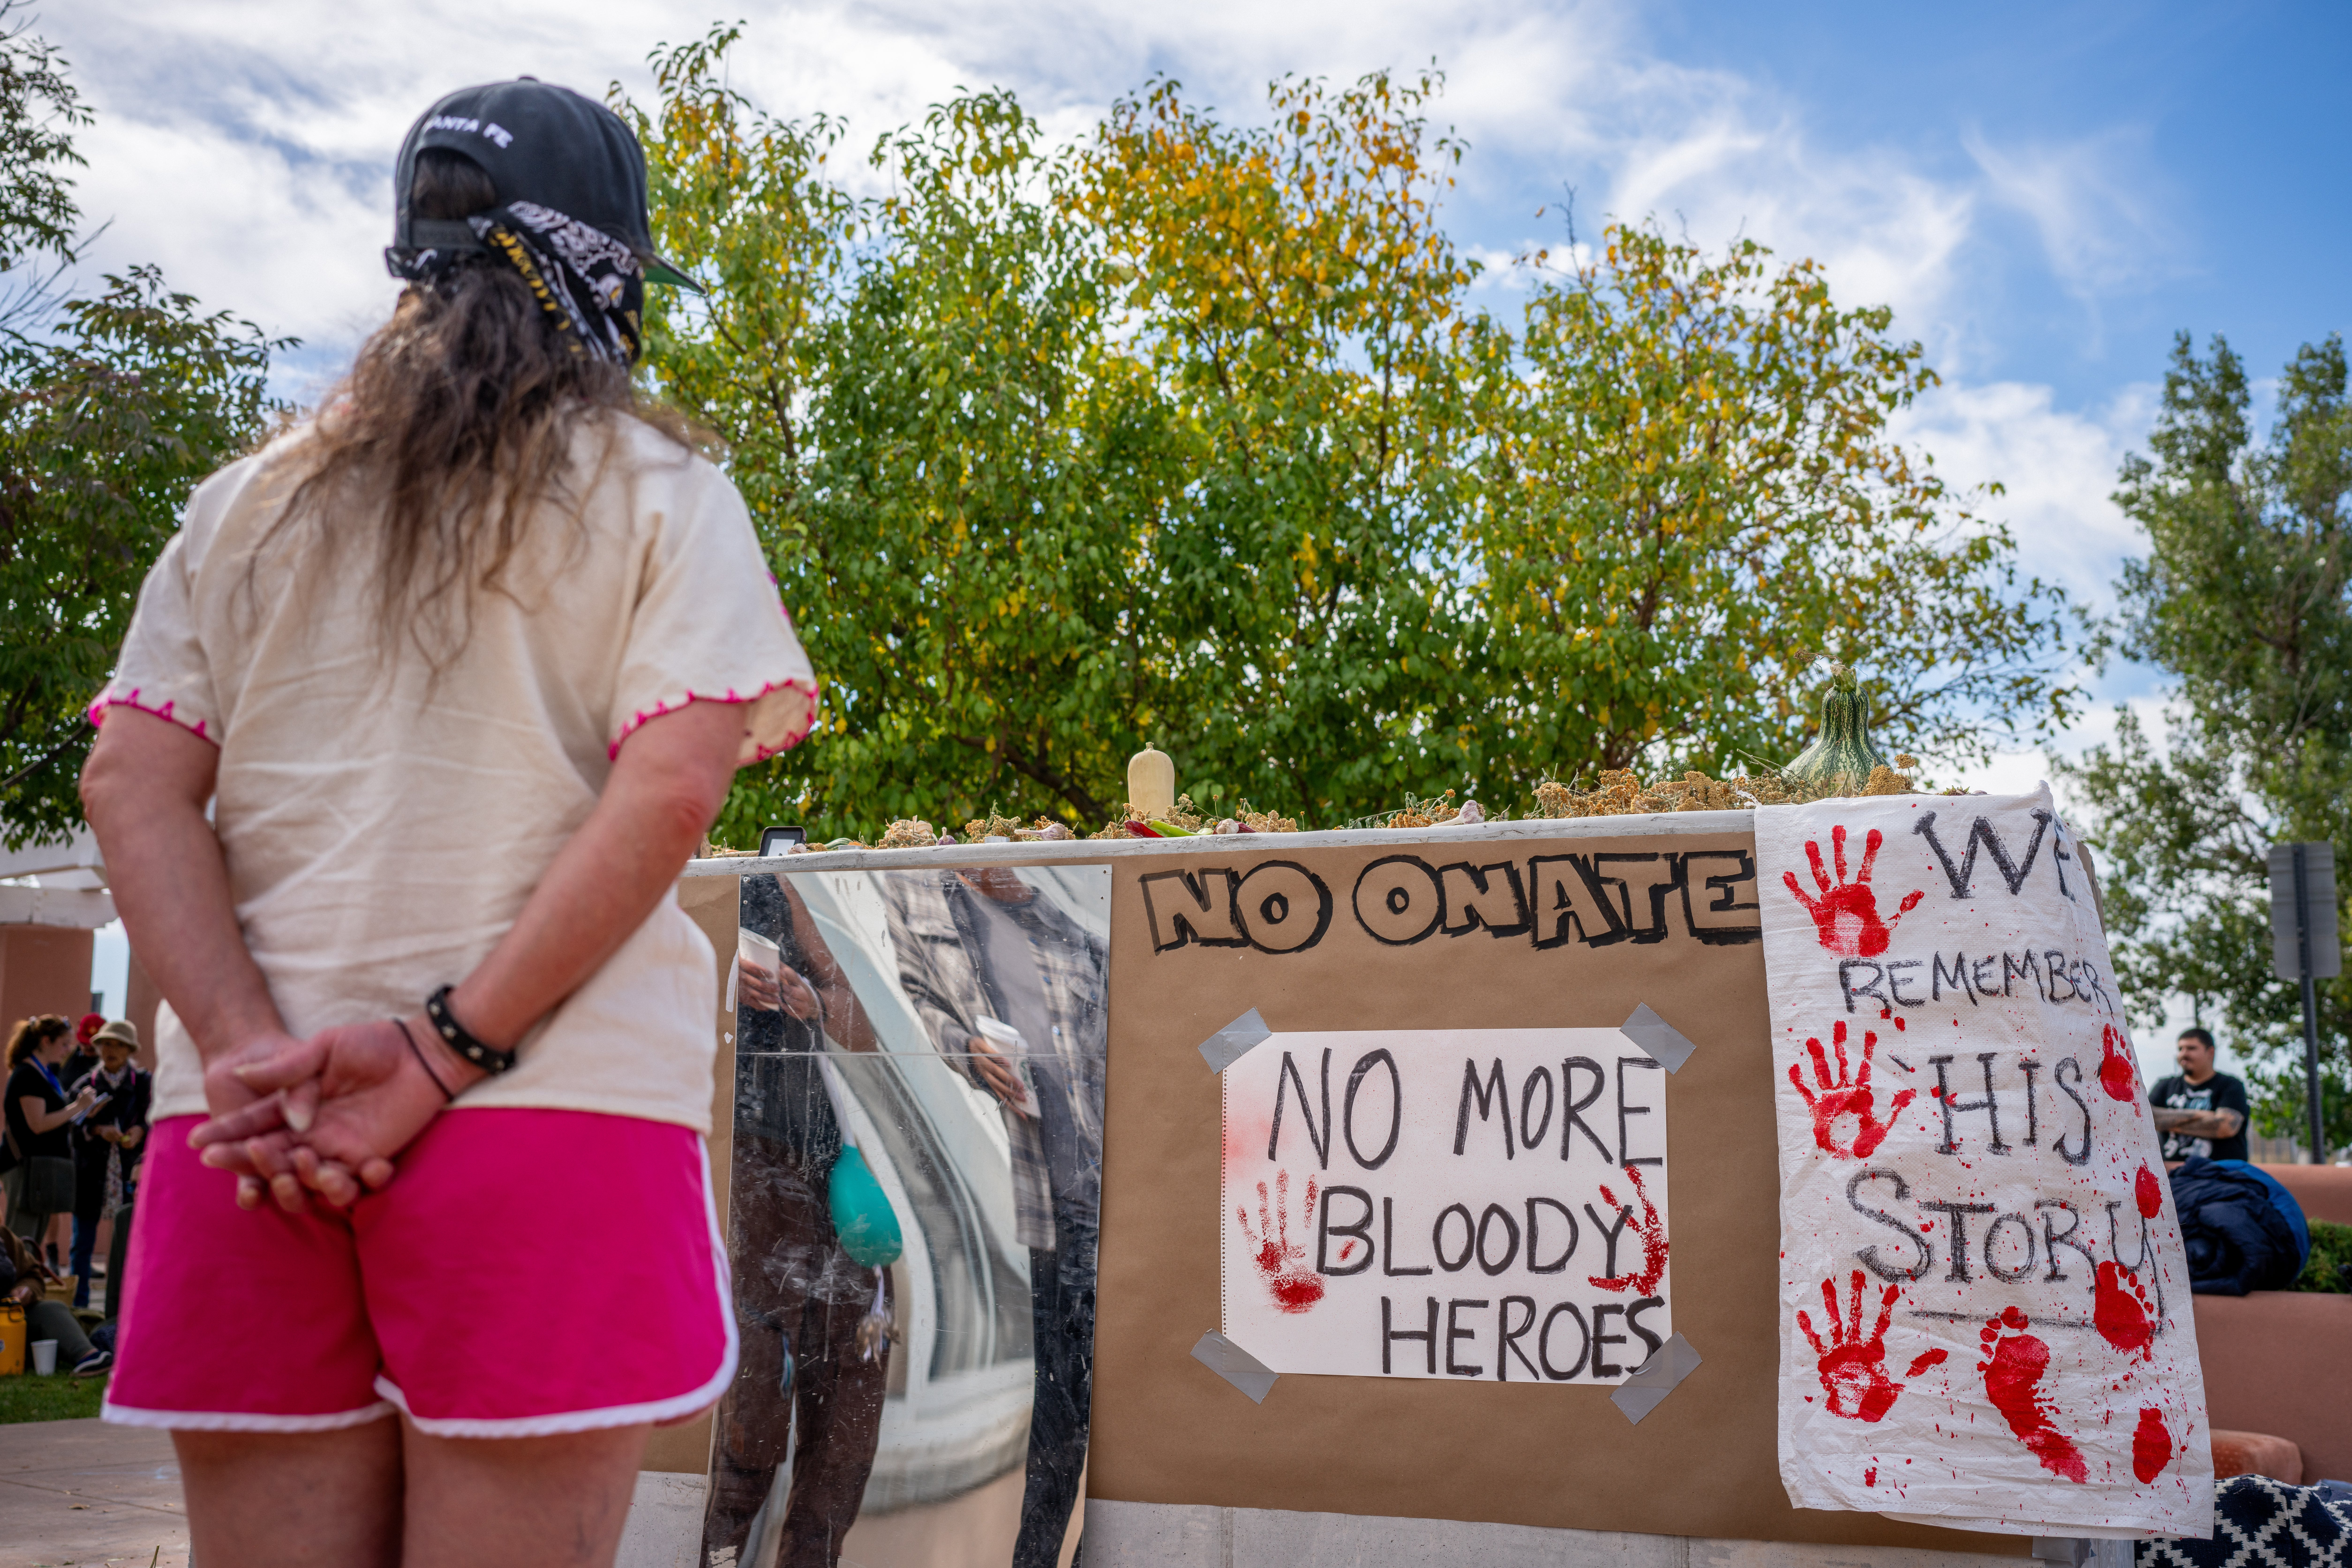 A demonstrator stands paying homage at a mural in protest against the reinstallation of a 16th-century New Mexico conquistador